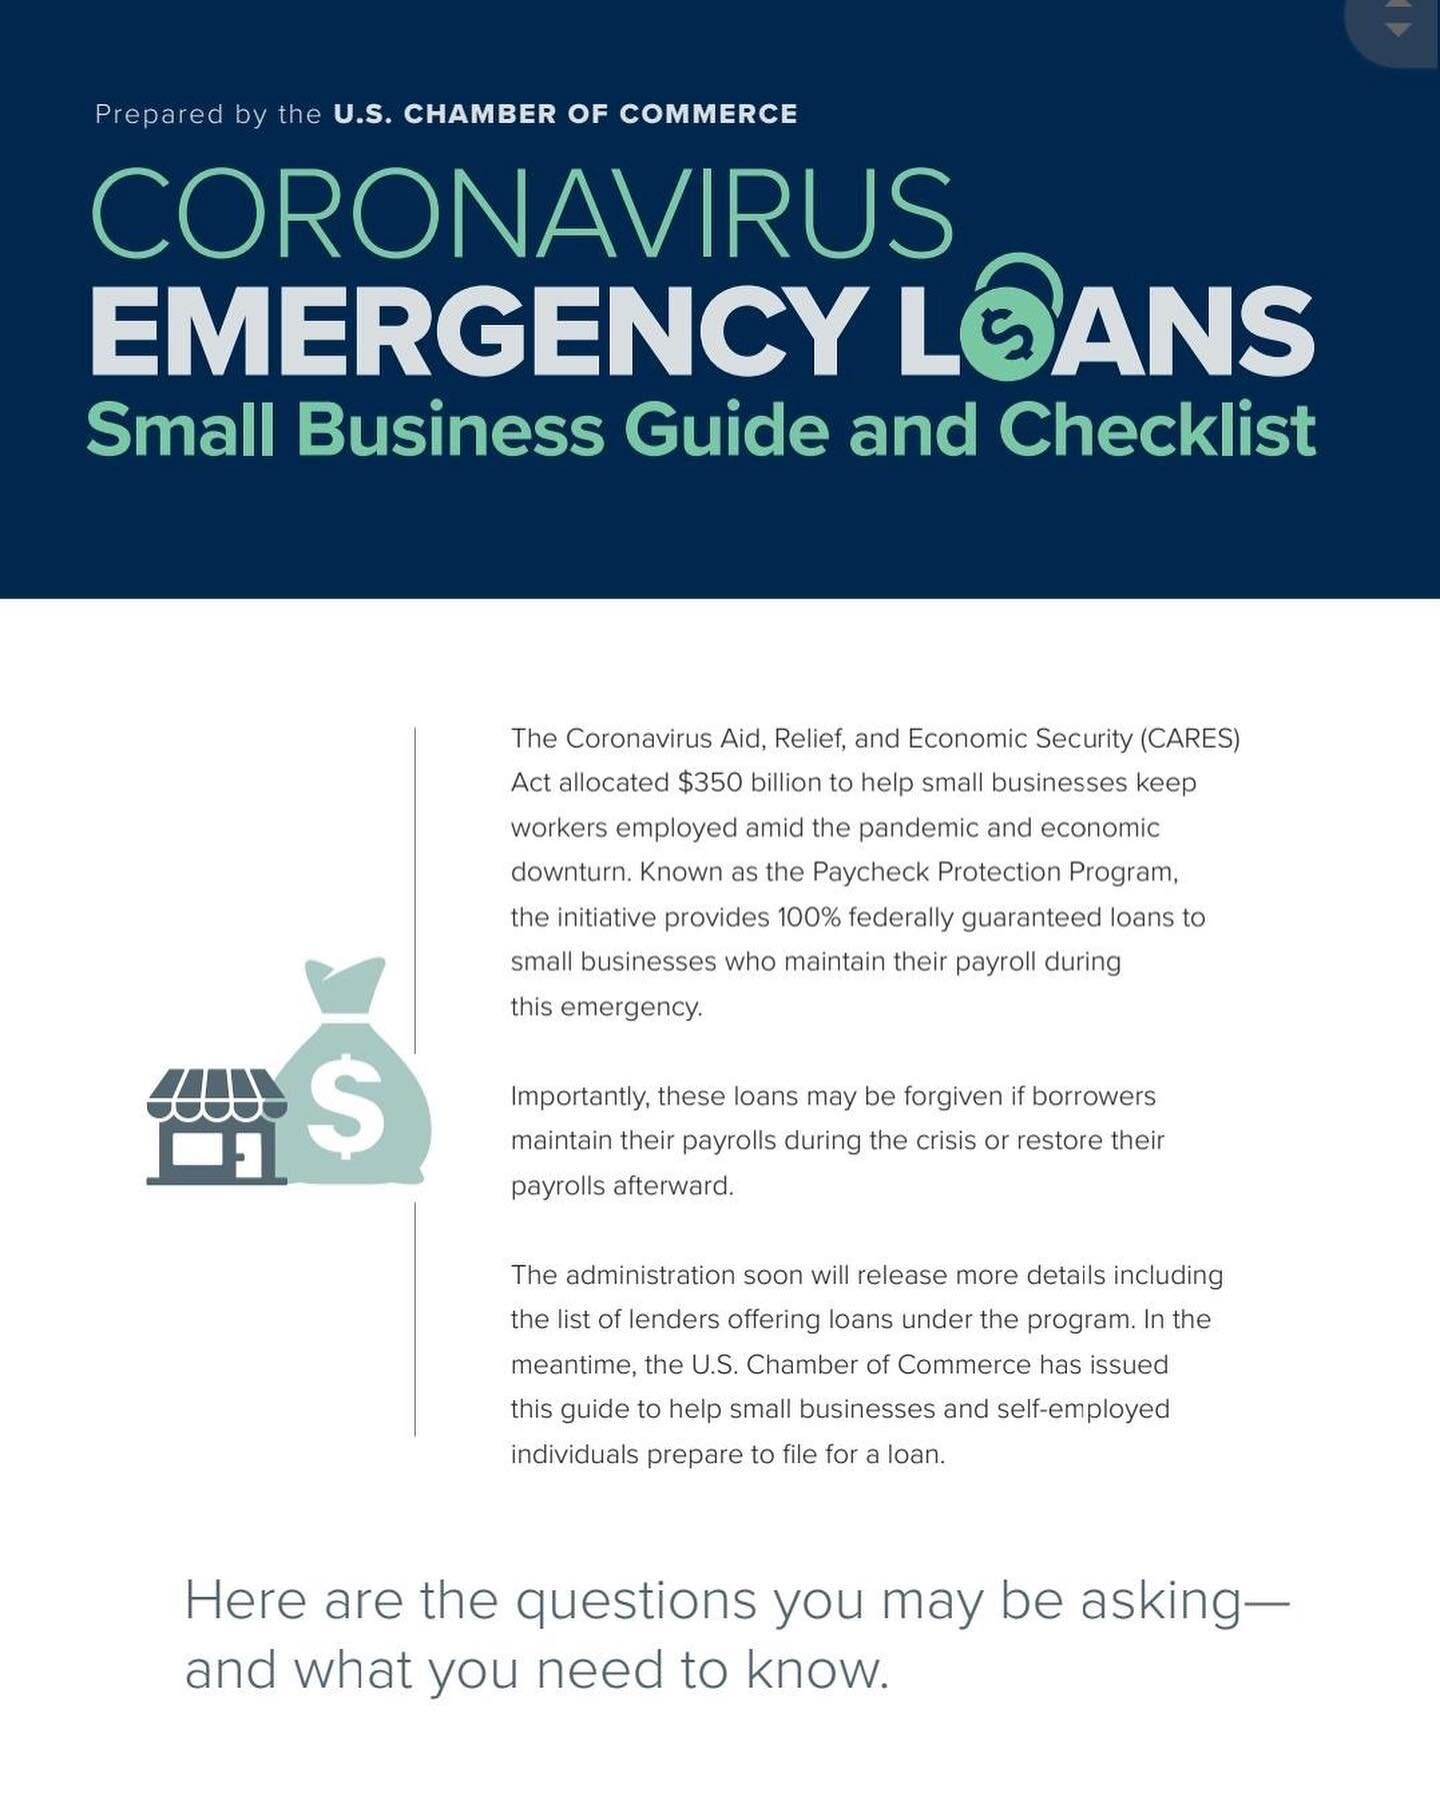 Super helpful information from the US Chamber of Commerce on the detailed terms for the payroll protection loan!